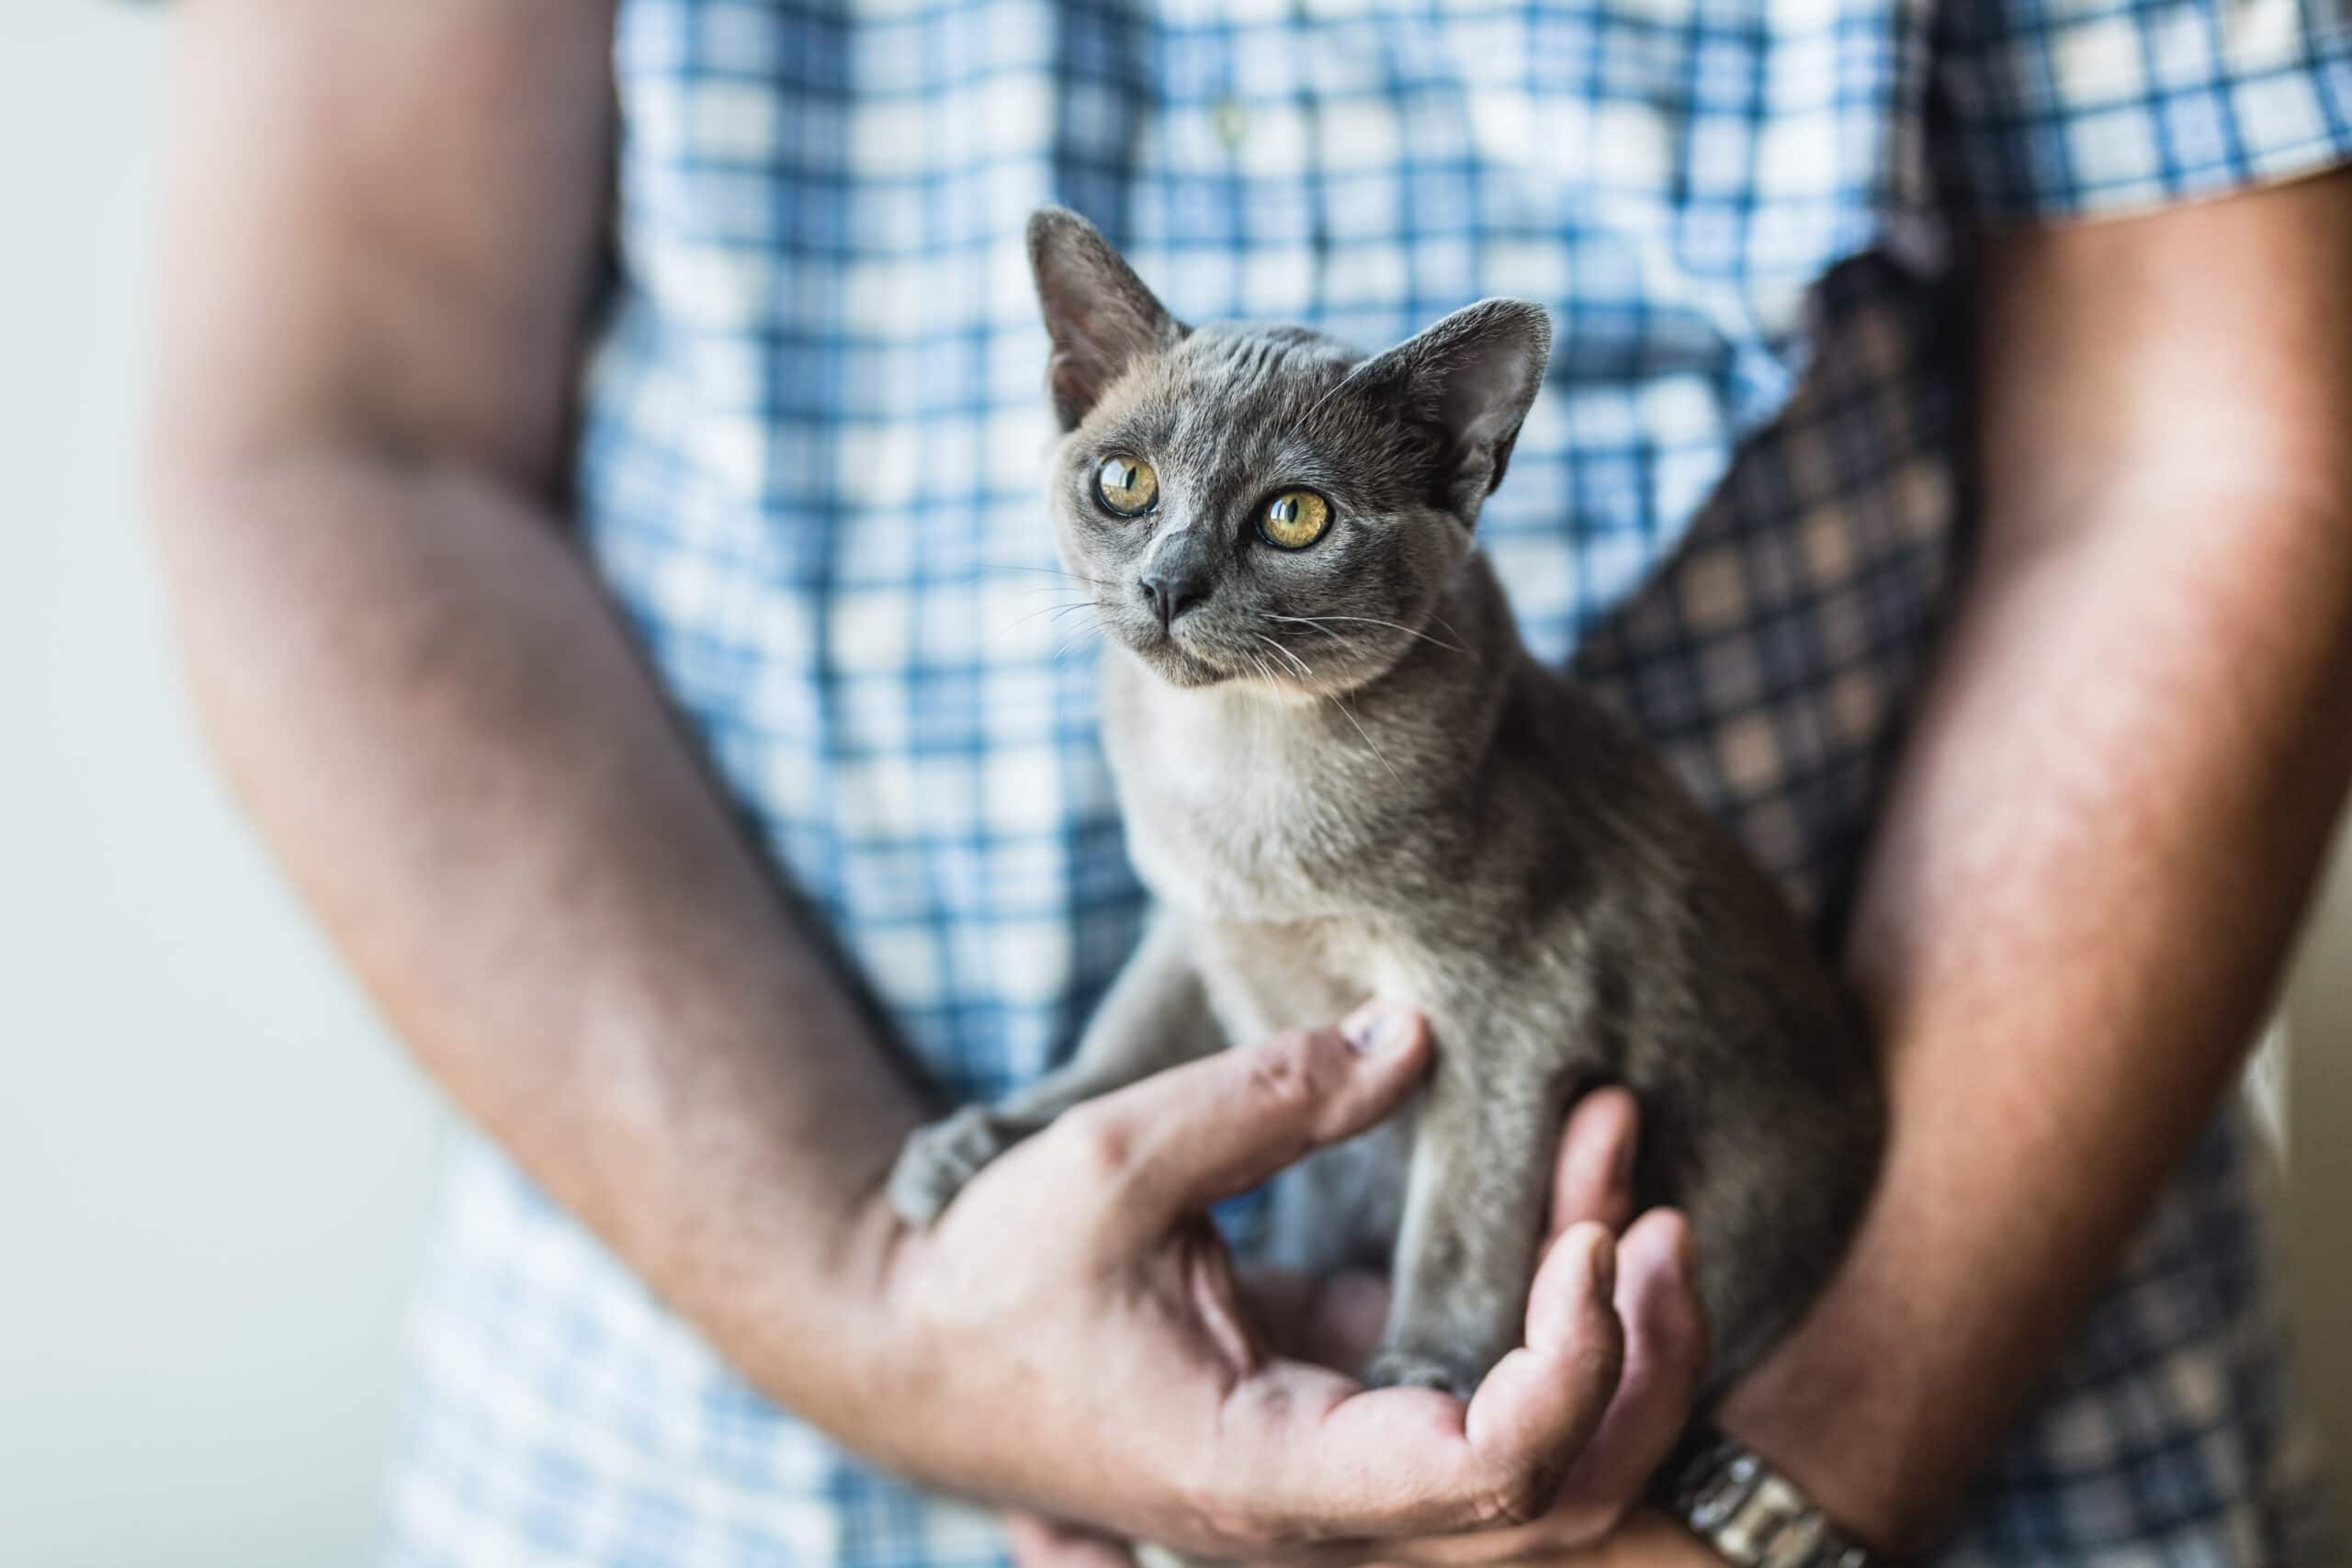 A cute young blue Burmese kitten in the arms of a person